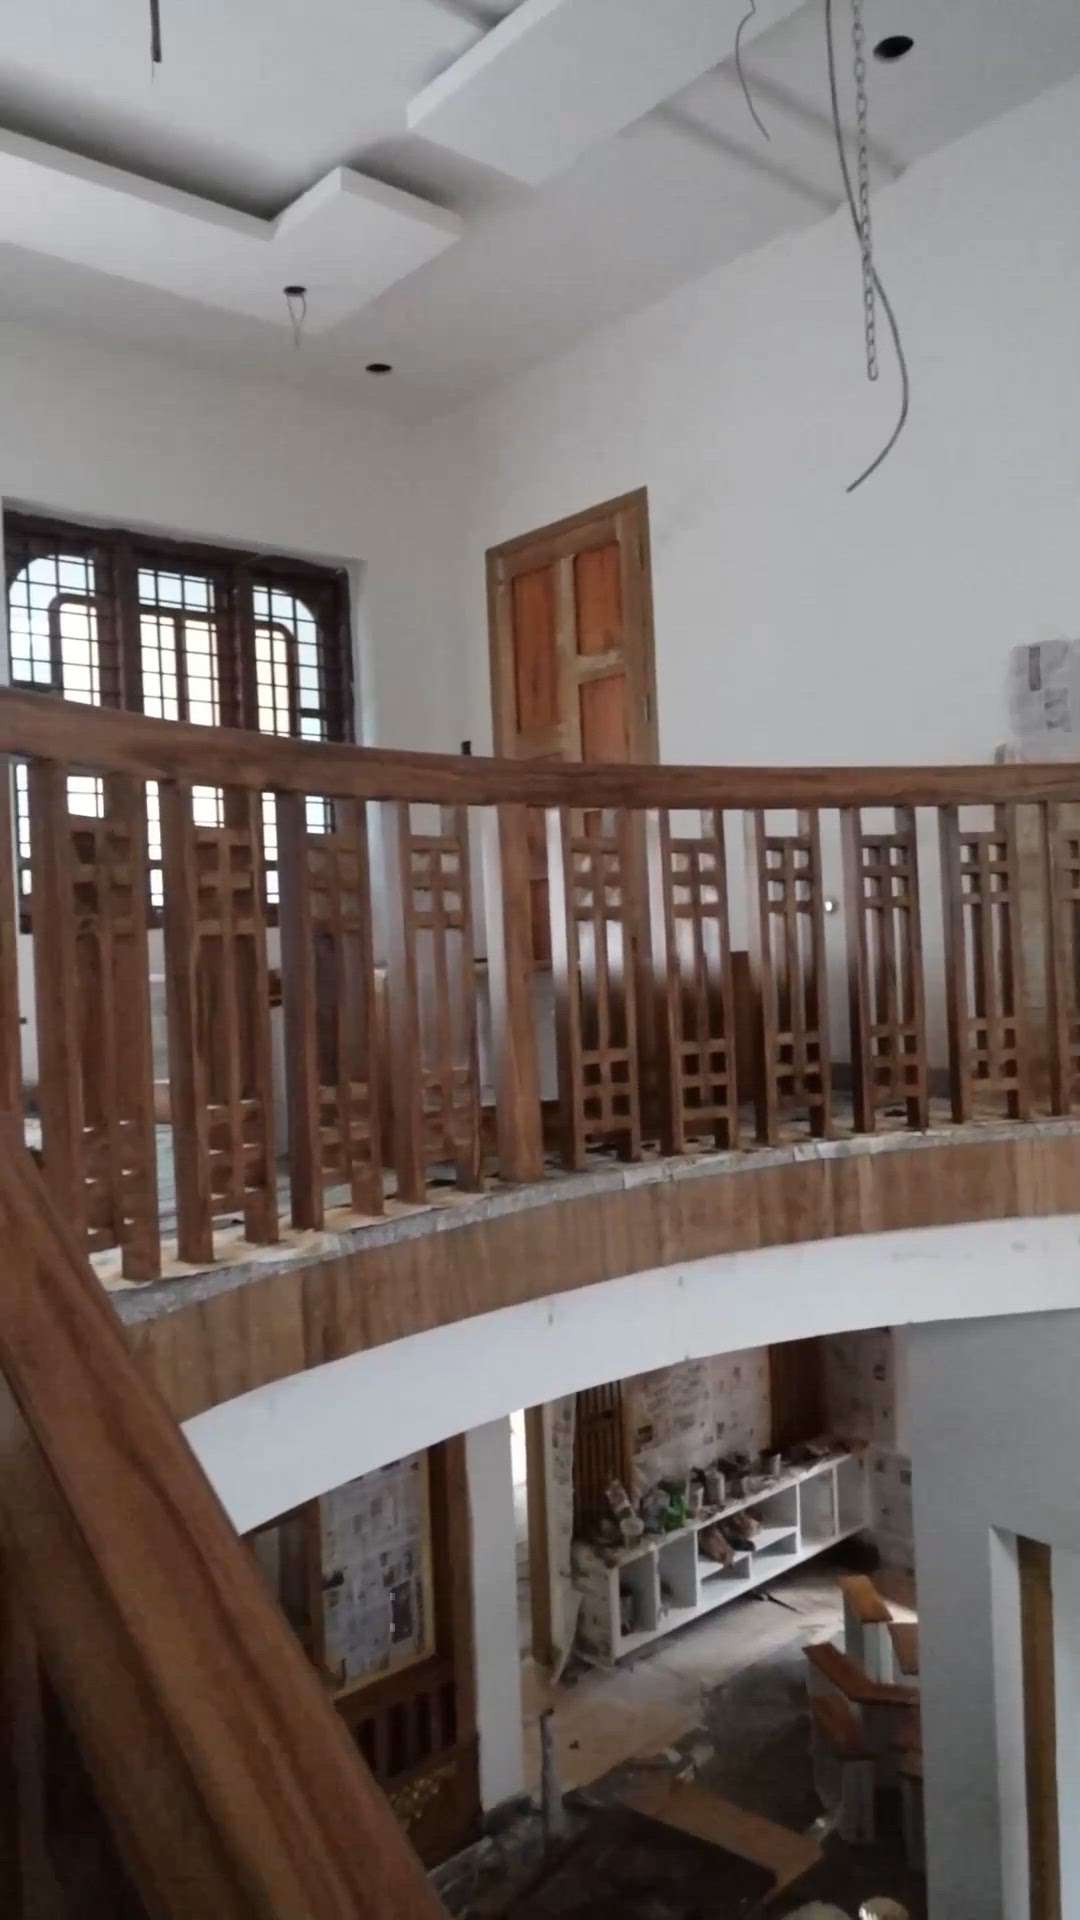 #StaircaseDecors  #ContemporaryHouse #moderndesign #wood #woodenrailing #keralastyle #TraditionalHouse